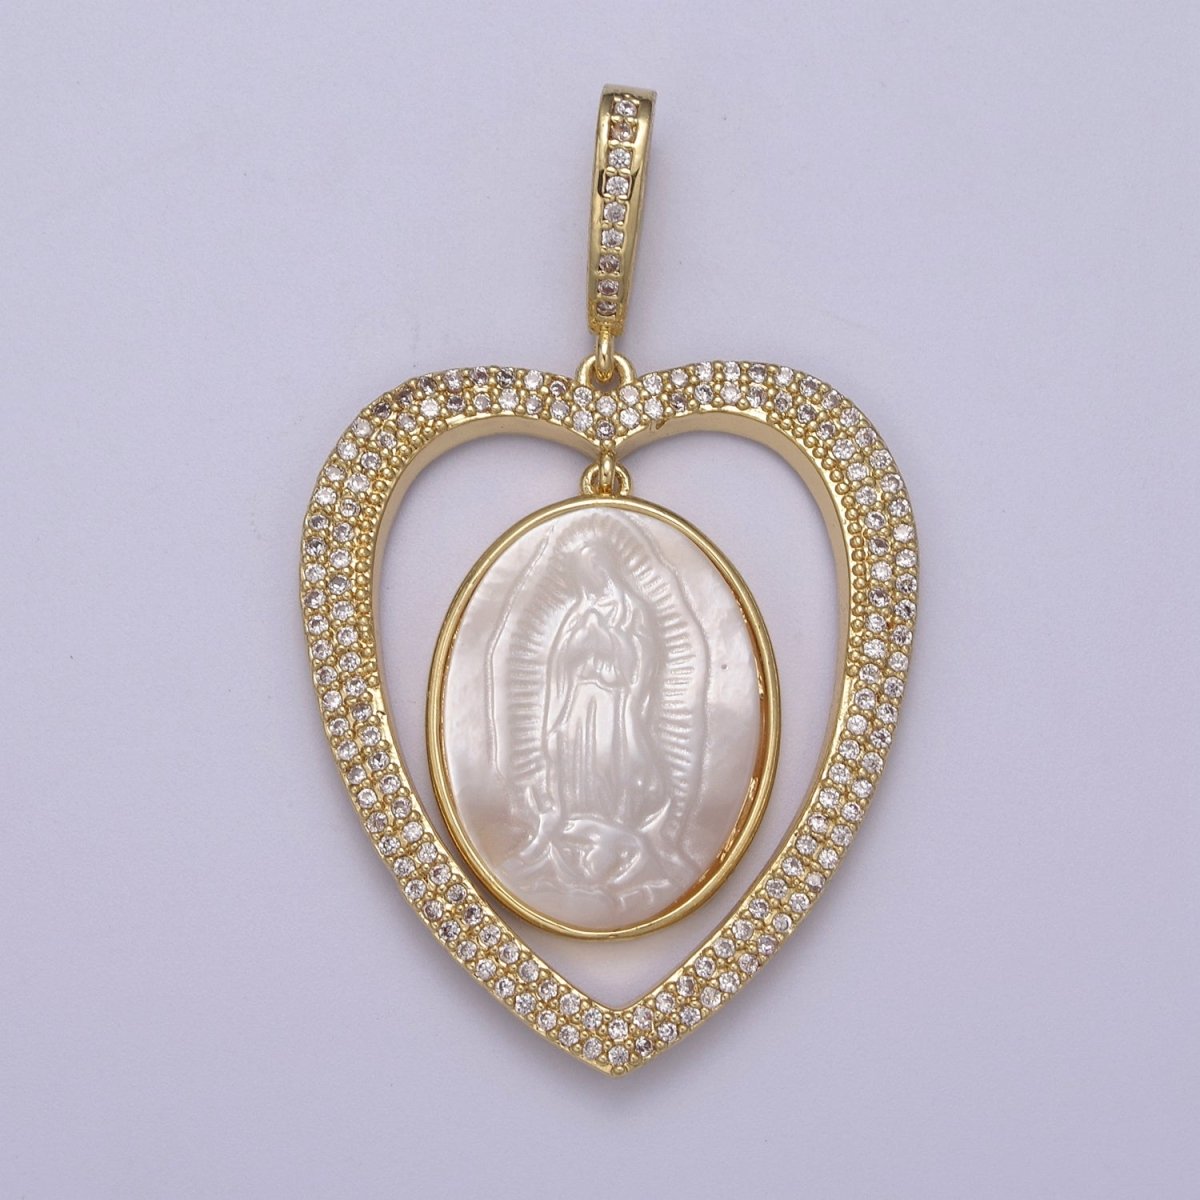 Chunky Heart Iced Out Pendant with Pearl Lady Guadalupe Charm for Statement Religious Jewelry Making H-507 - DLUXCA